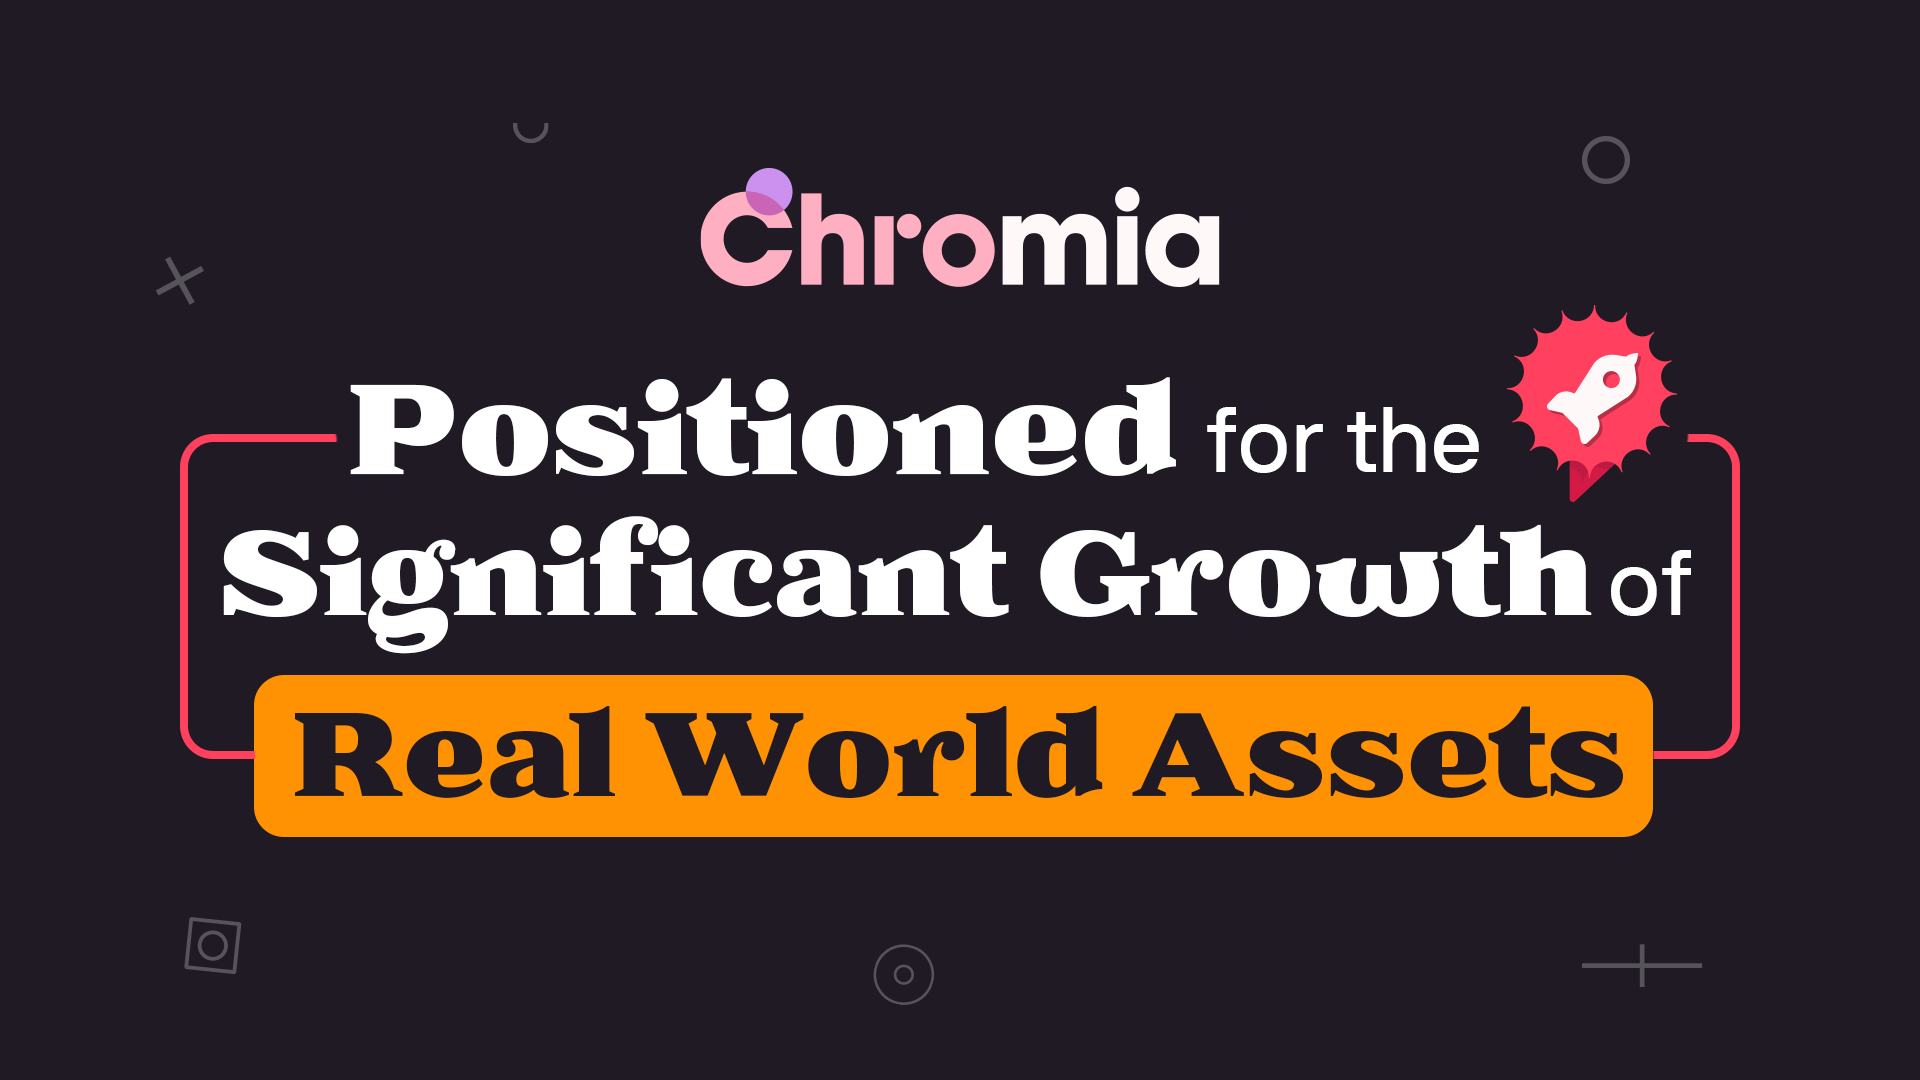 Chromia: Positioned for the Significant Growth of Real World Assets